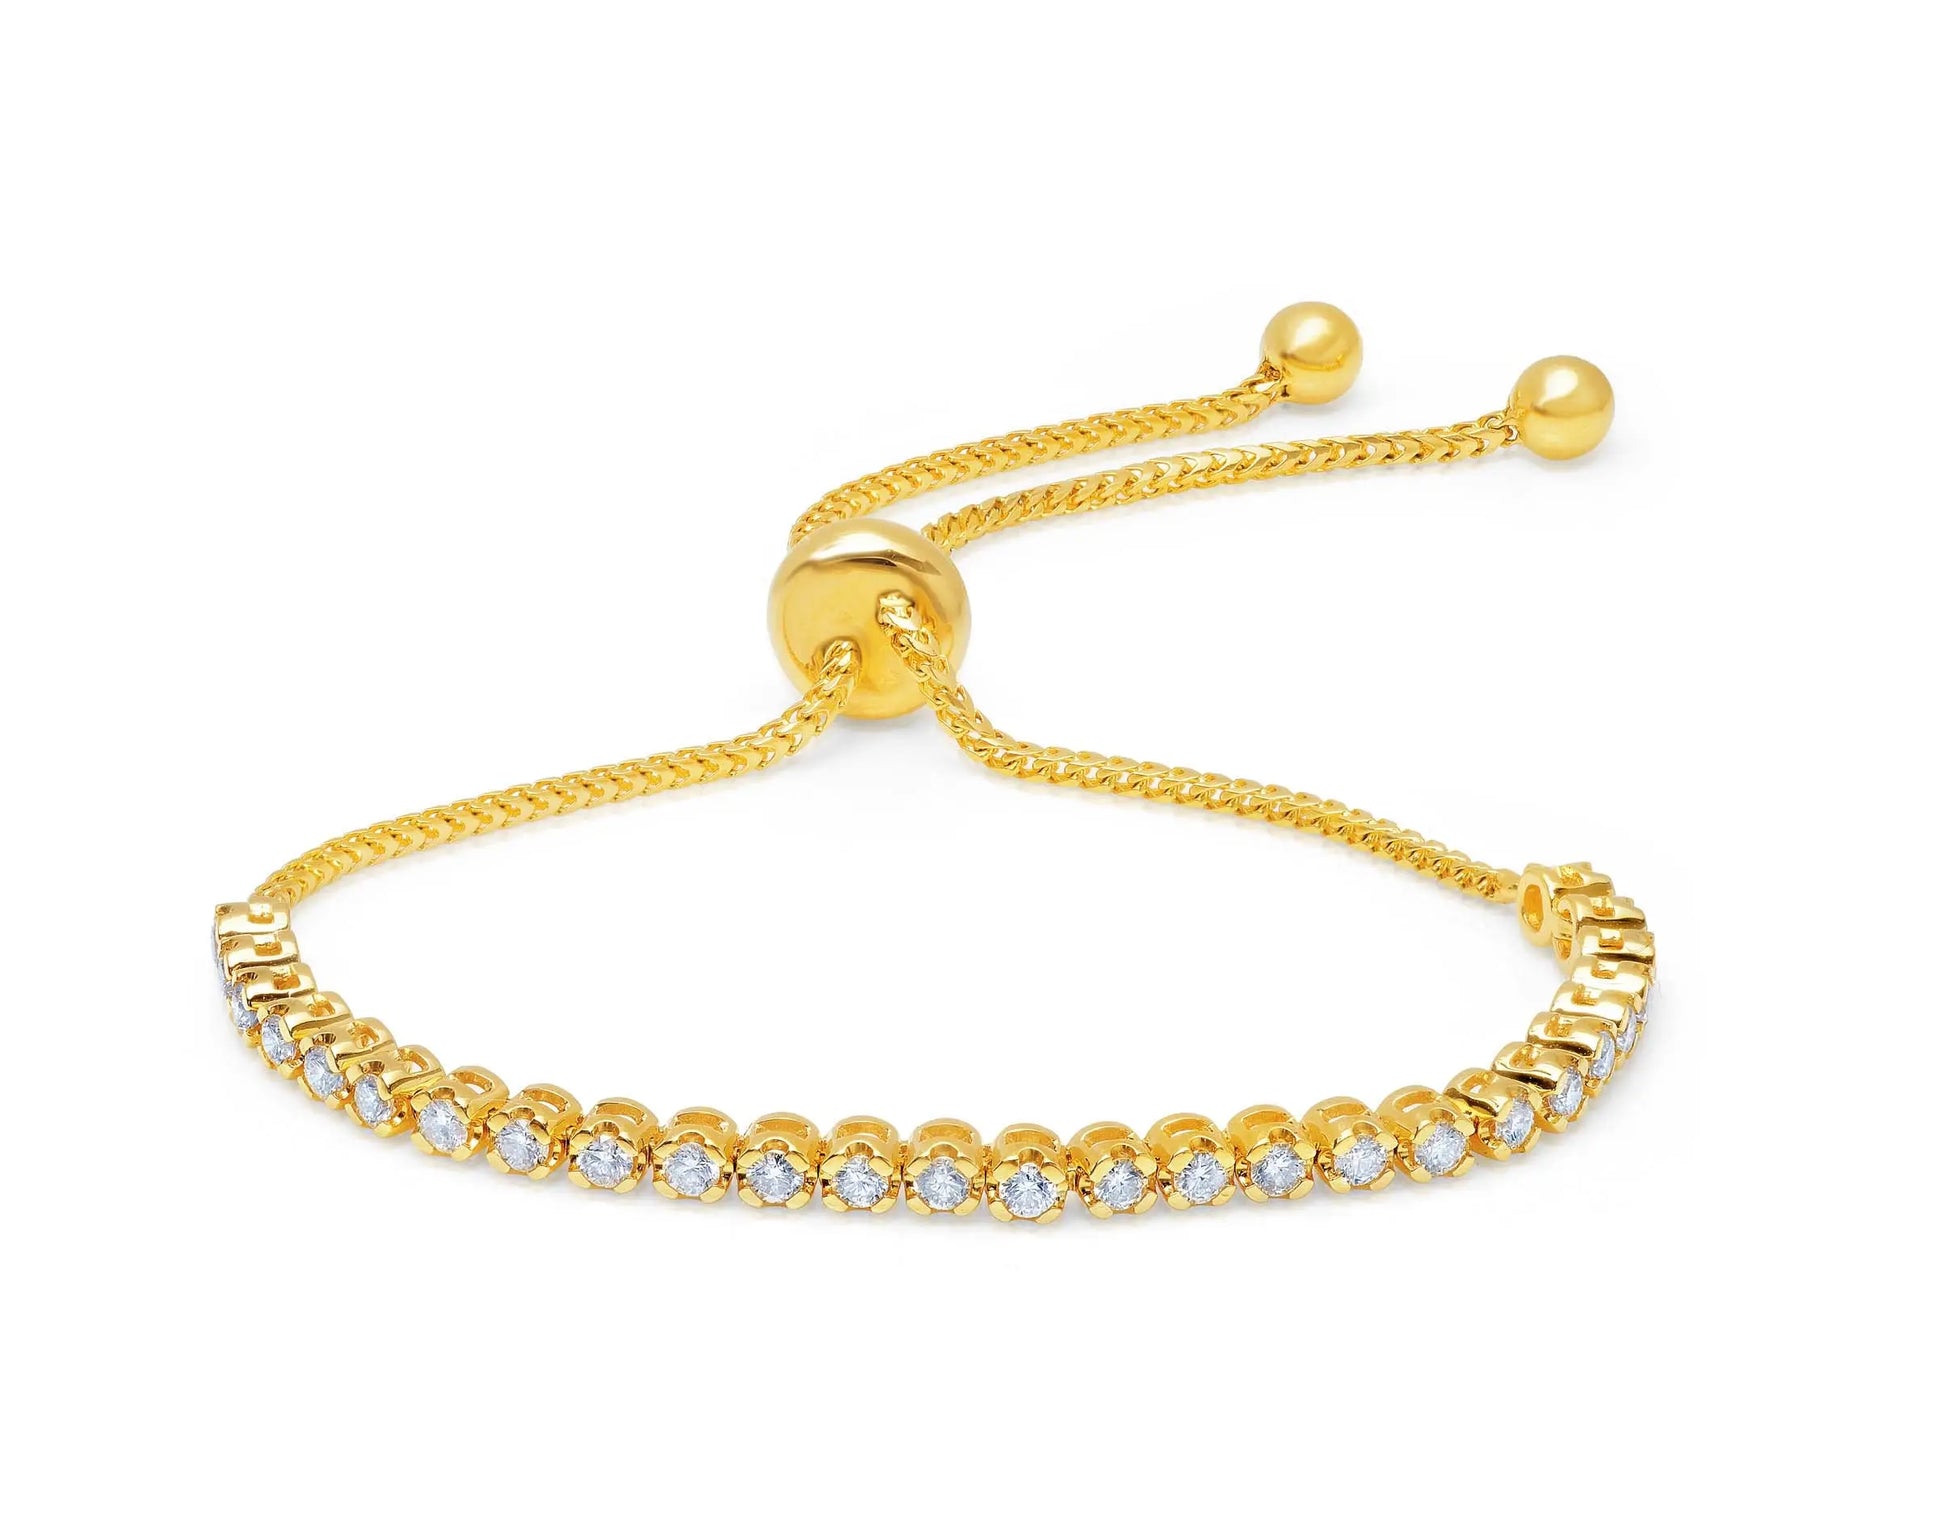 If you're looking for a simple diamond bracelet, you will love the bolo style. Easy to wear and adjust, you'll never want to take it off. 18k yellow gold with a brilliant white diamond over 1 cttw.   Details:  Gemstone: White Diamonds, 1 carat, G-H Metal: 18K Yellow Gold Sizing: 9 Inches Fully Adjustable Designed by Graziela Gems